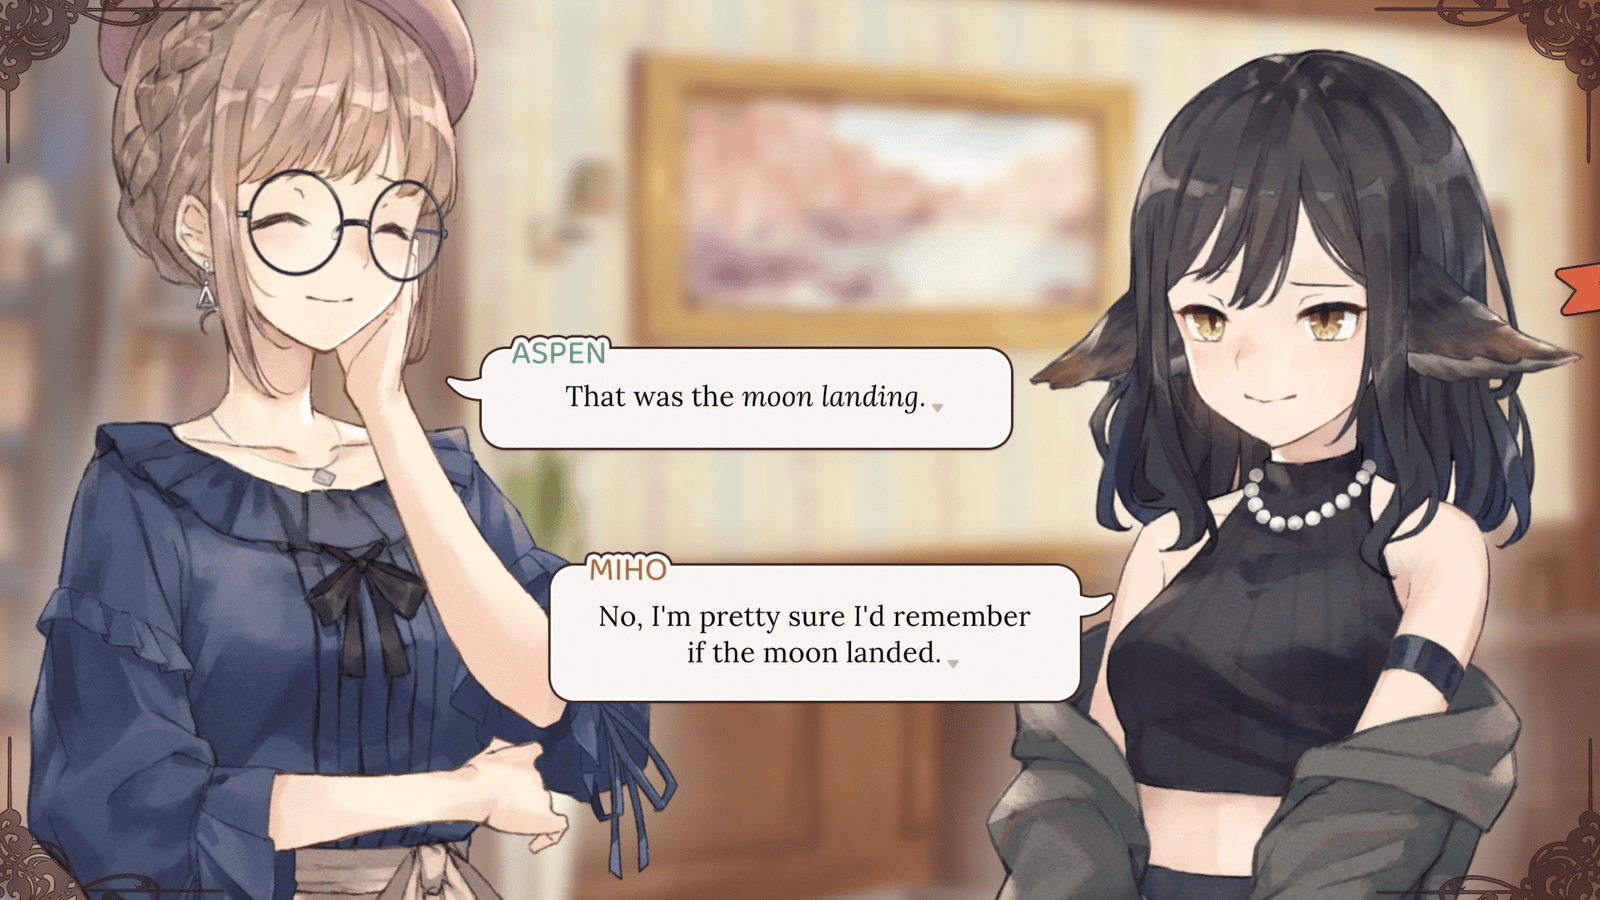 In the visual novel please be happy, two women are speaking with each other. The one on the left says "that was the moon landing! ". The other replies "no, i'm pretty sure I'd remember if the moon landed."